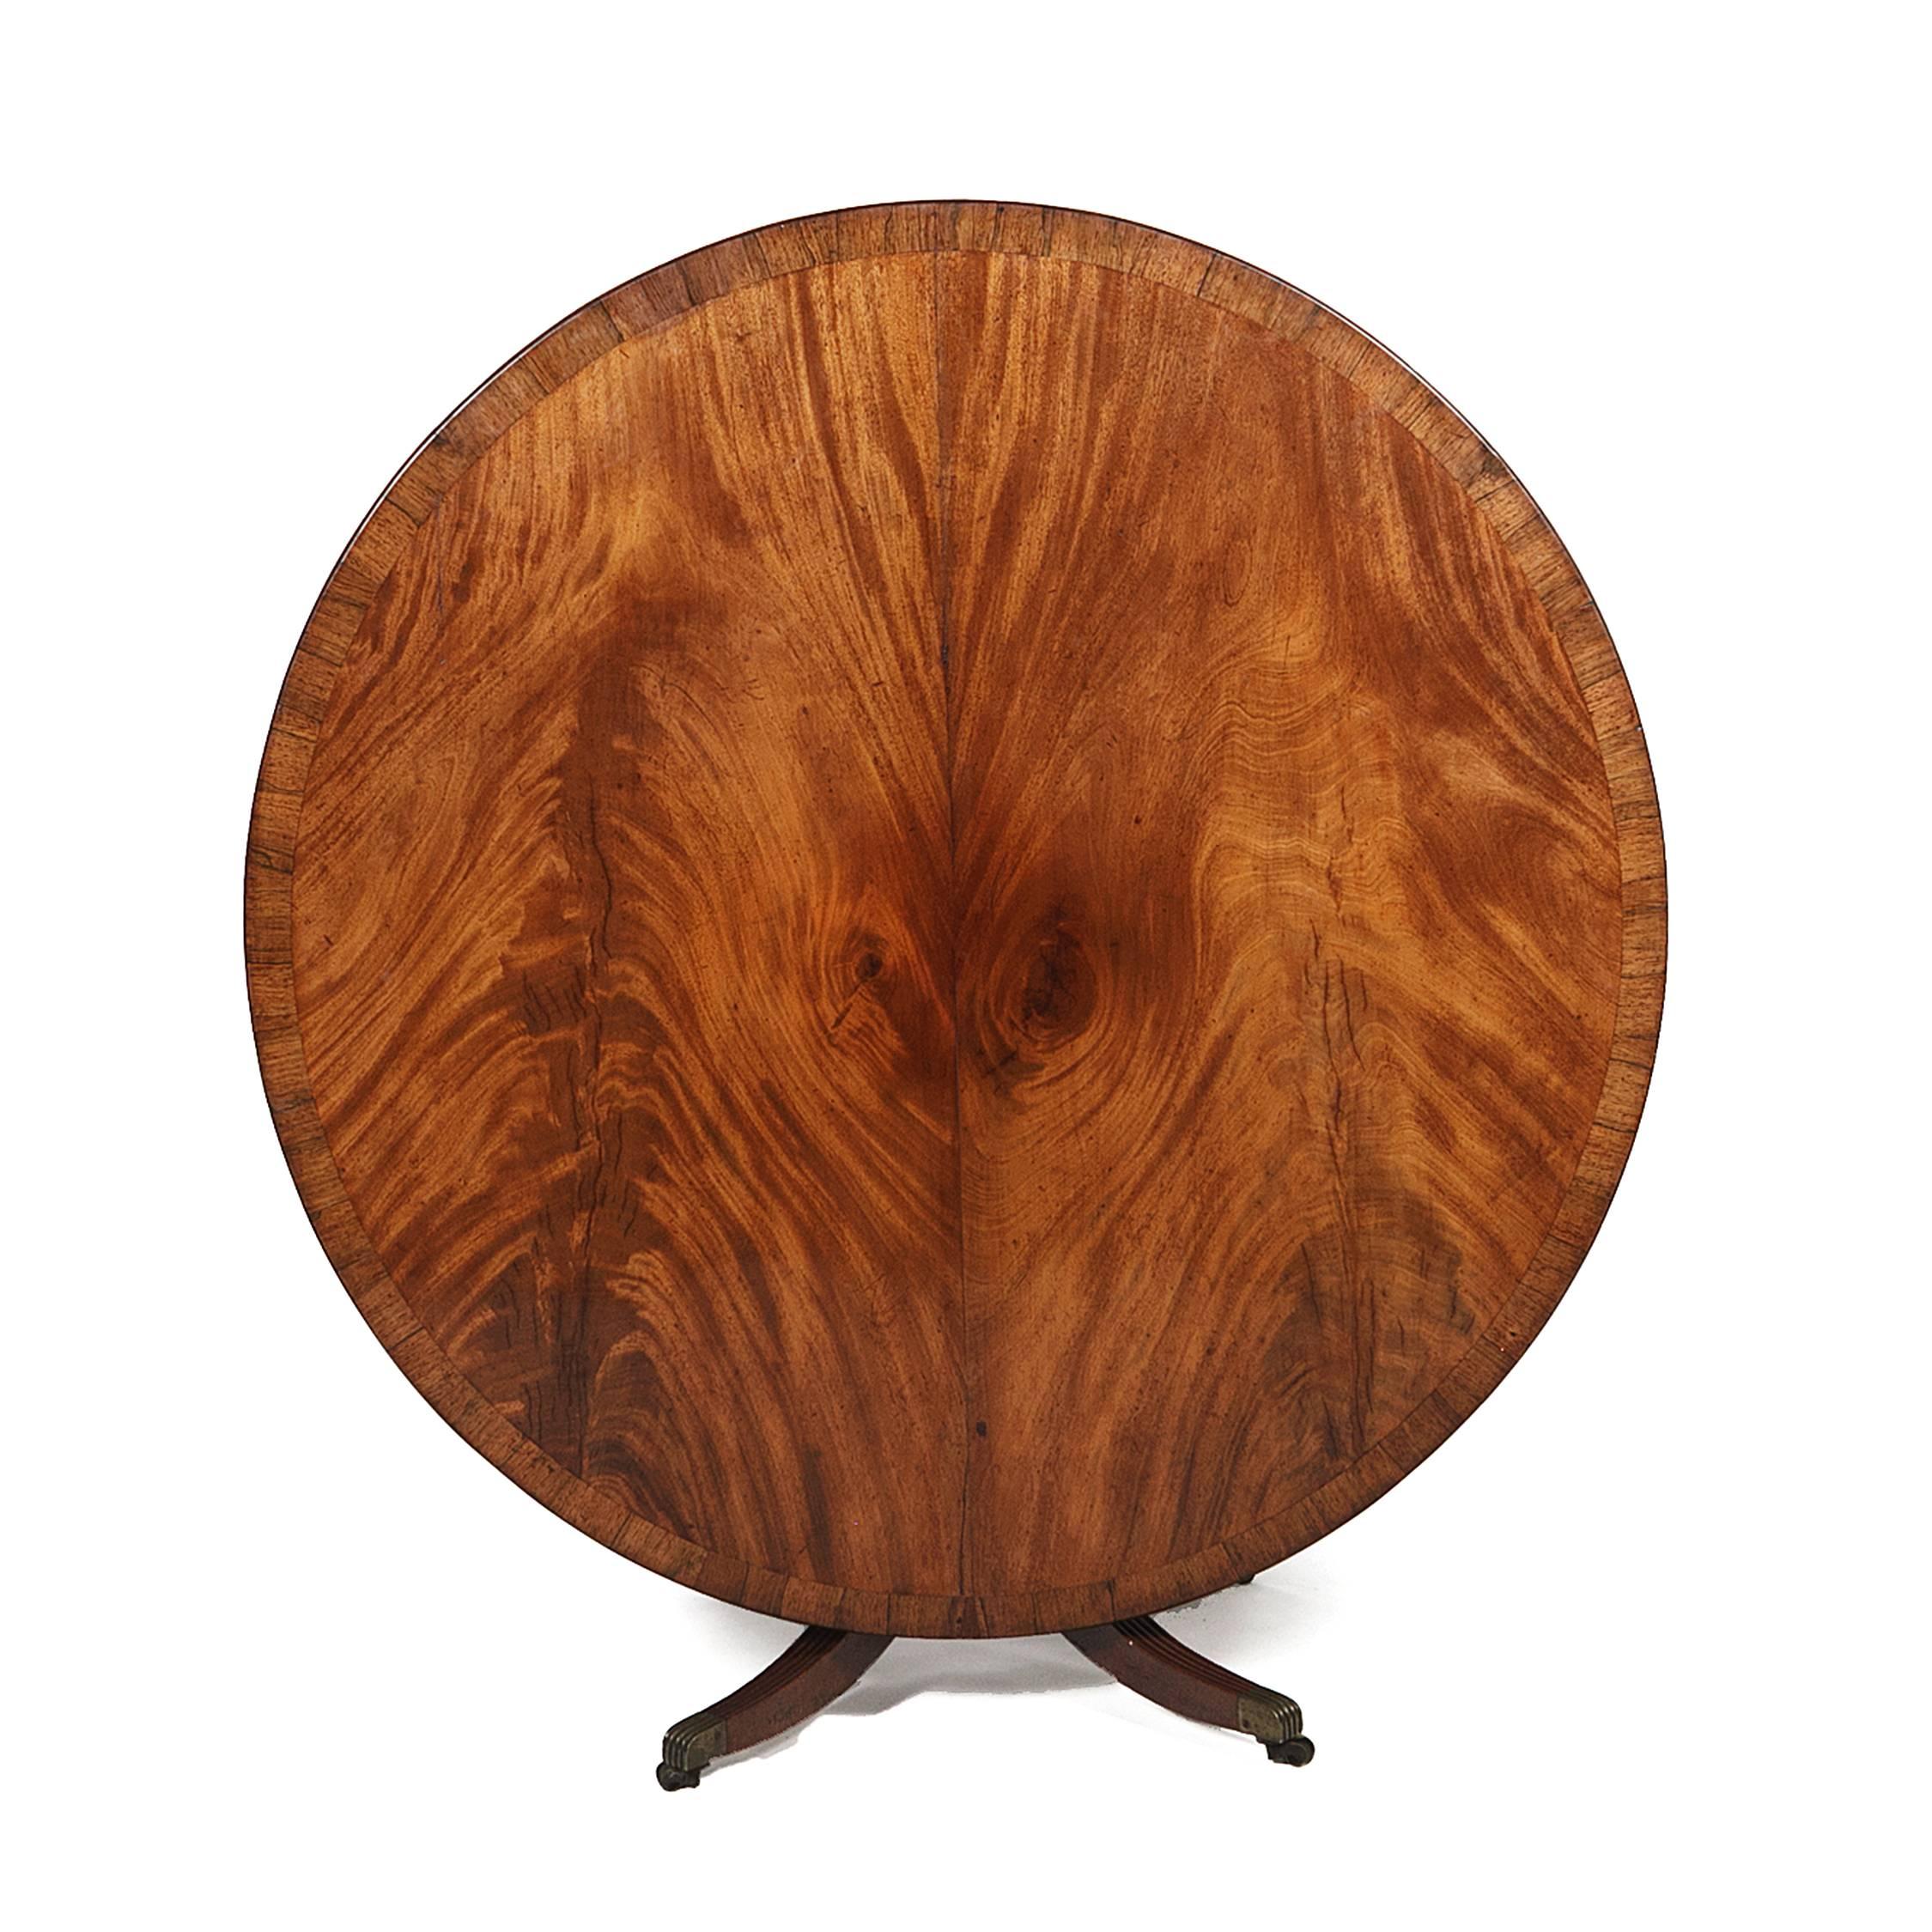 This circular mahogany center table, with a rich finish and a striking grain, is supported on a single turned pedestal with four reeded, outsplayed legs, and with brass toe caps and casters.